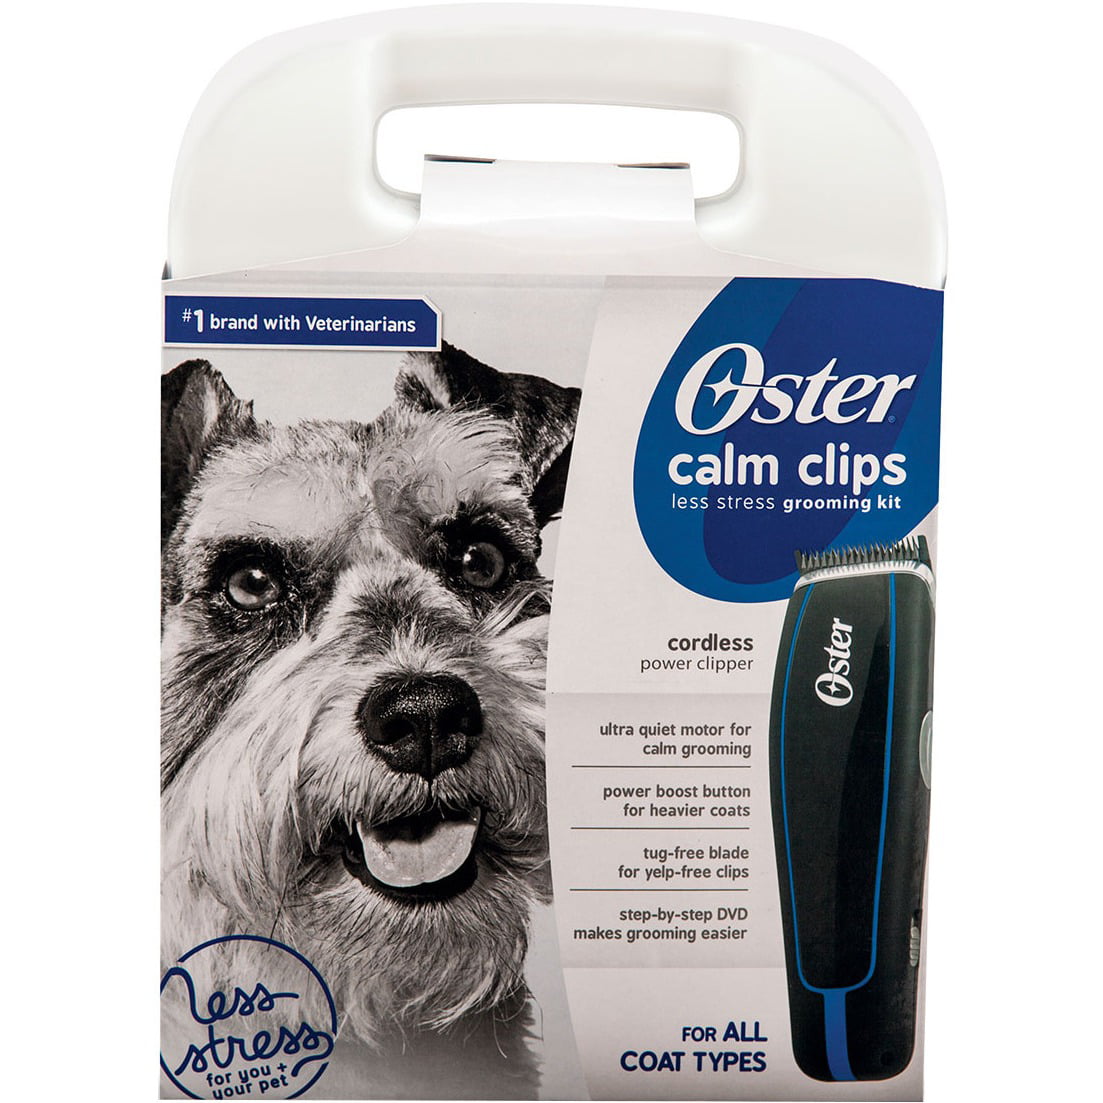 oster home grooming kit